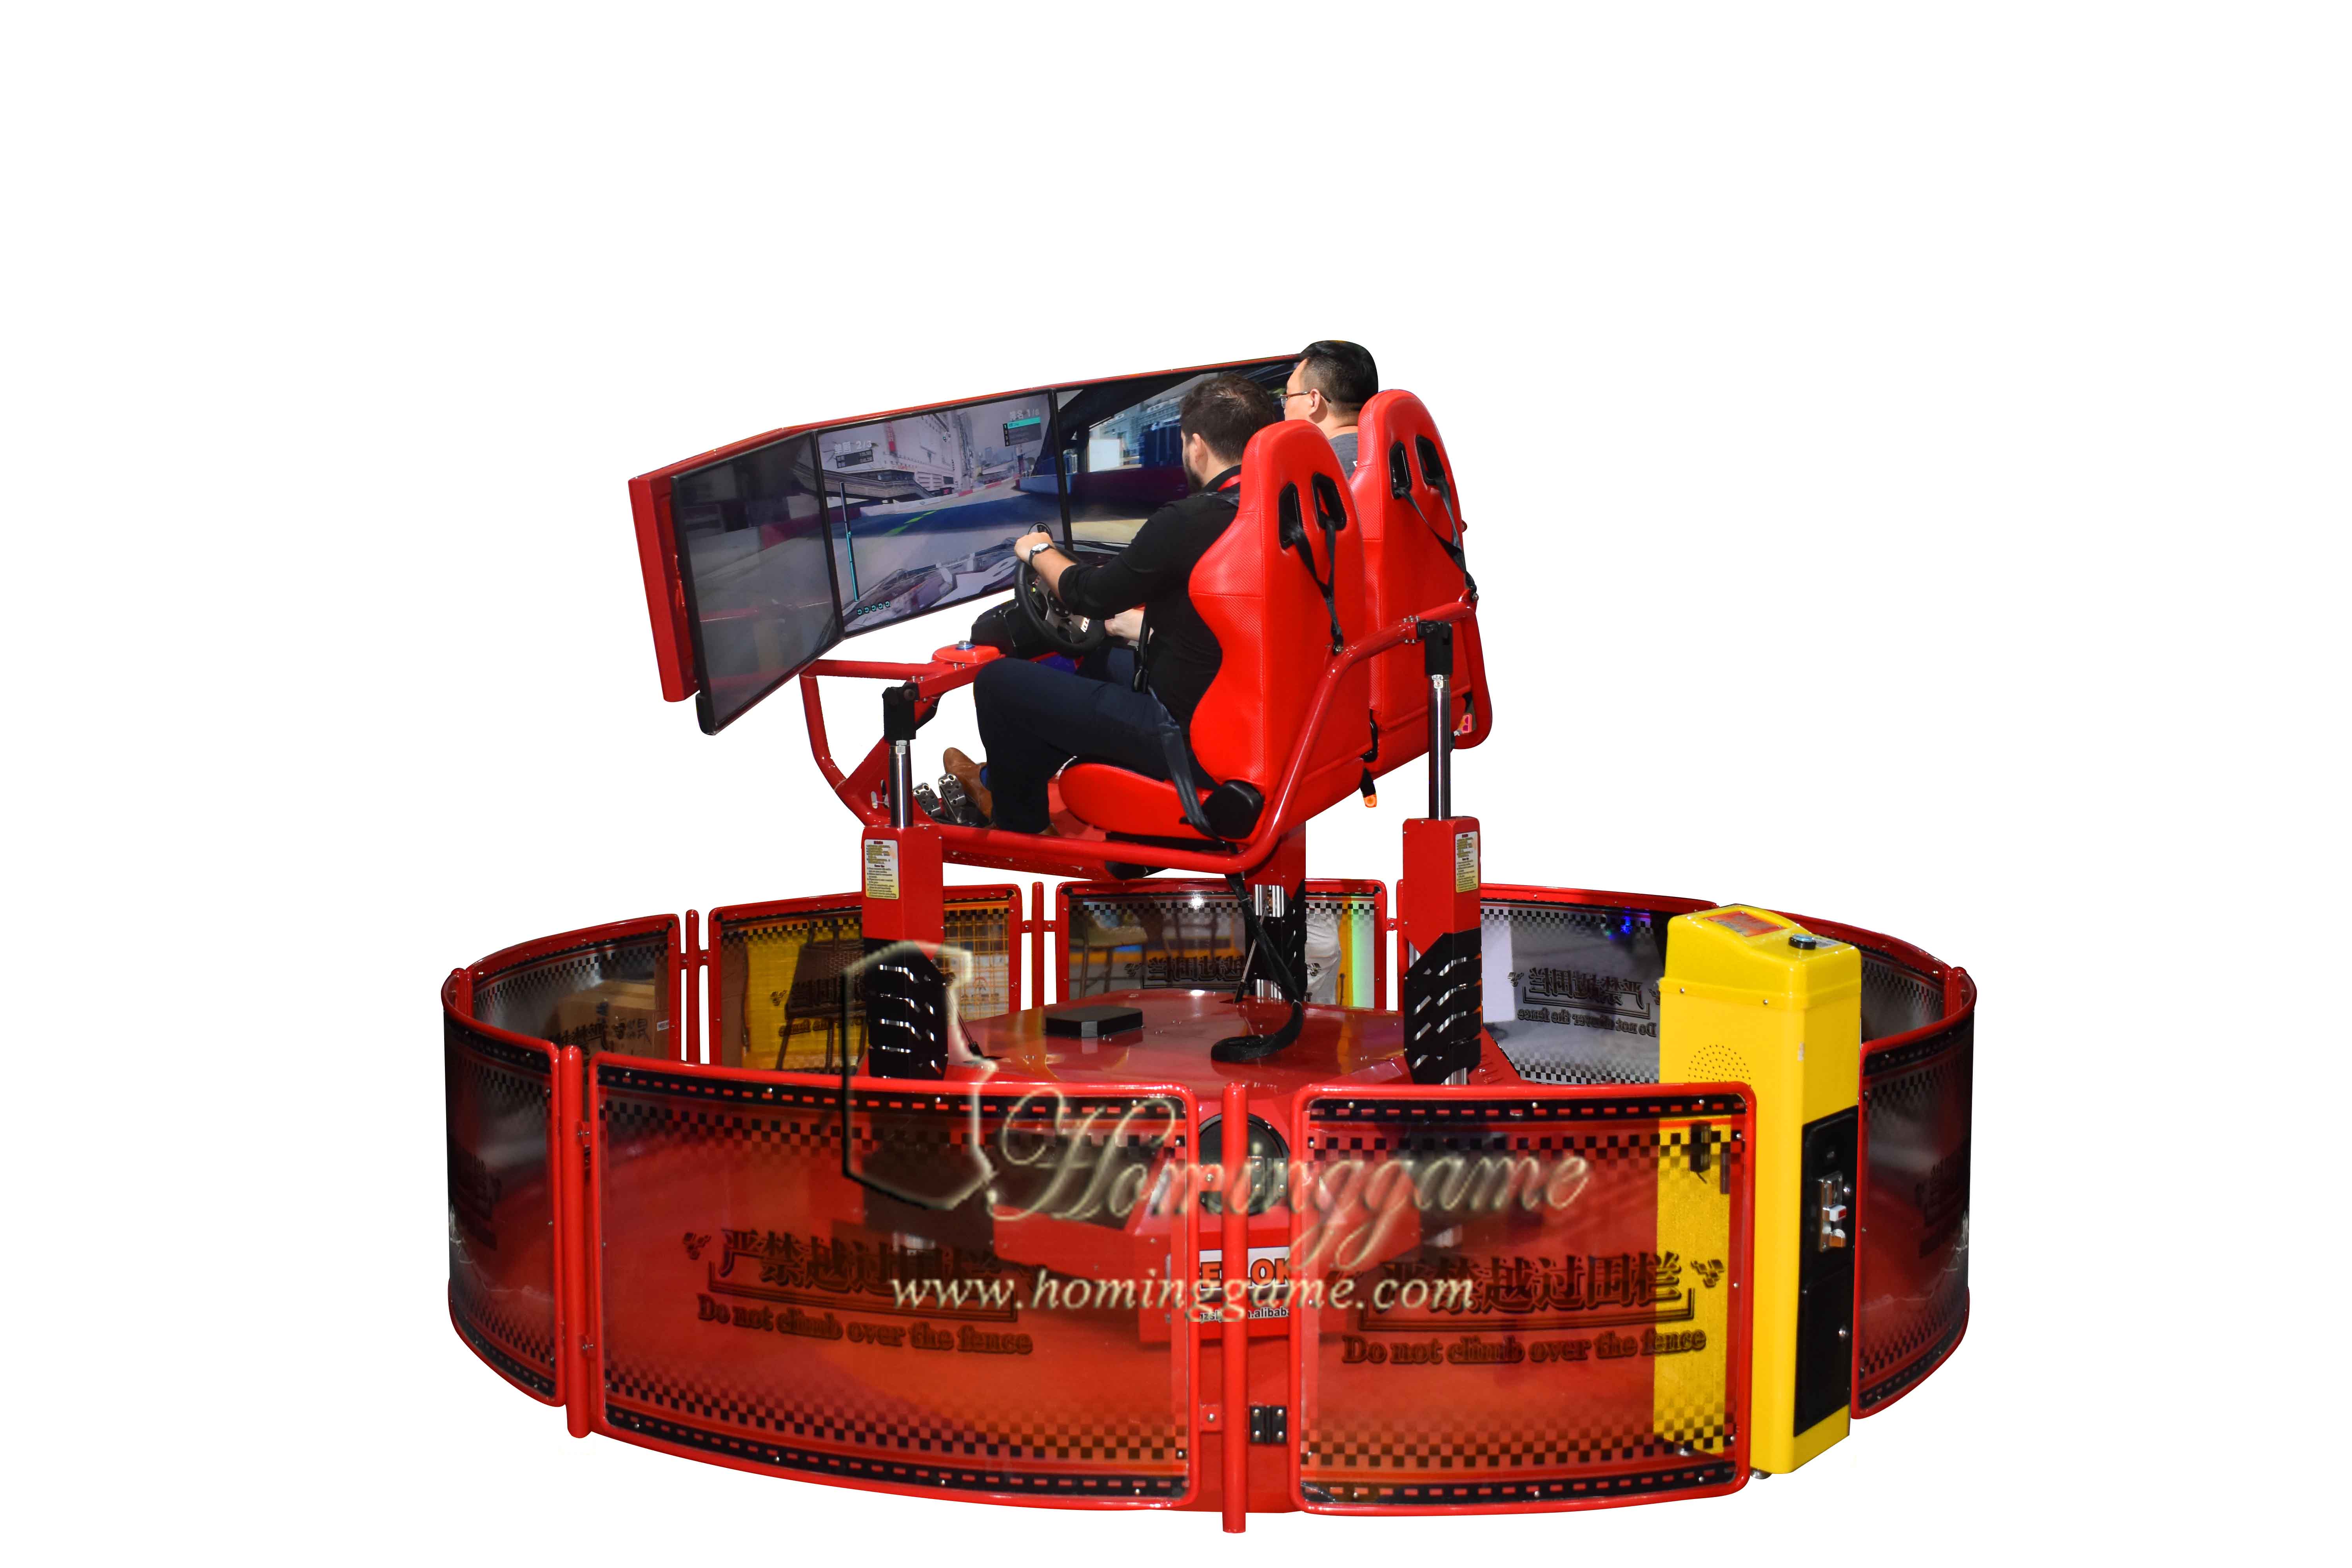 2018 Newest 360 Degree Rotating Racing Car Game Machine With Hydraumatic System By HomingGame,Rotating Car Game Machine,360 degree rotating racing car game machine,Car Game Machine,Simulator Game Machine,Racing Gaming Machine,Racing Machine,Video Game Machine,Arade Video Game Machine,Racing Machine,Racing Game,Game Machine,Arcade Game Machine,Coin Operated Game Machine,Amusement Park Game Equipment,Indoor Game Machine,Electrical Game Machine,Gaming Machine,Coin Games,Indoor Game Machine,Racing Car Game Machine Supplier,Racing Car Game Machine Manufactuer,HD Racing Car Game Machine,HomingGame Racing Car Game Machine